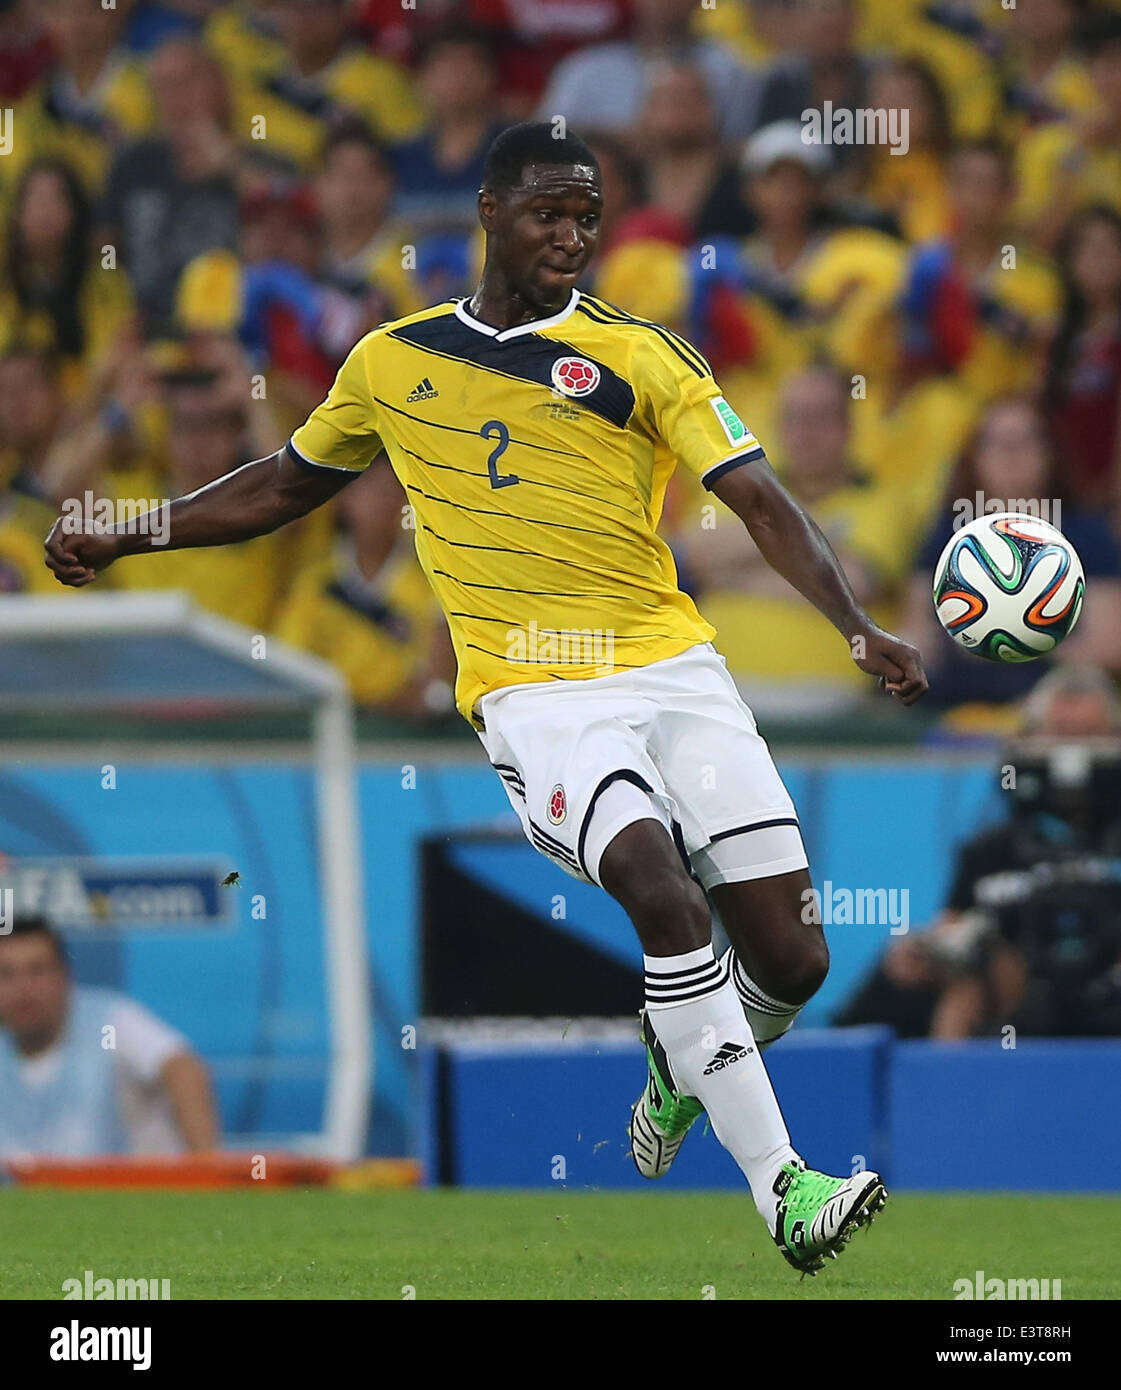 Rio De Janeiro, Brazil. 28th June, 2014. Colombia's Cristian Zapata controls the ball during a Round of 16 match between Colombia and Uruguay of 2014 FIFA World Cup at the Estadio do Maracana Stadium in Rio de Janeiro, Brazil, on June 28, 2014. Credit:  Xu Zijian/Xinhua/Alamy Live News Stock Photo